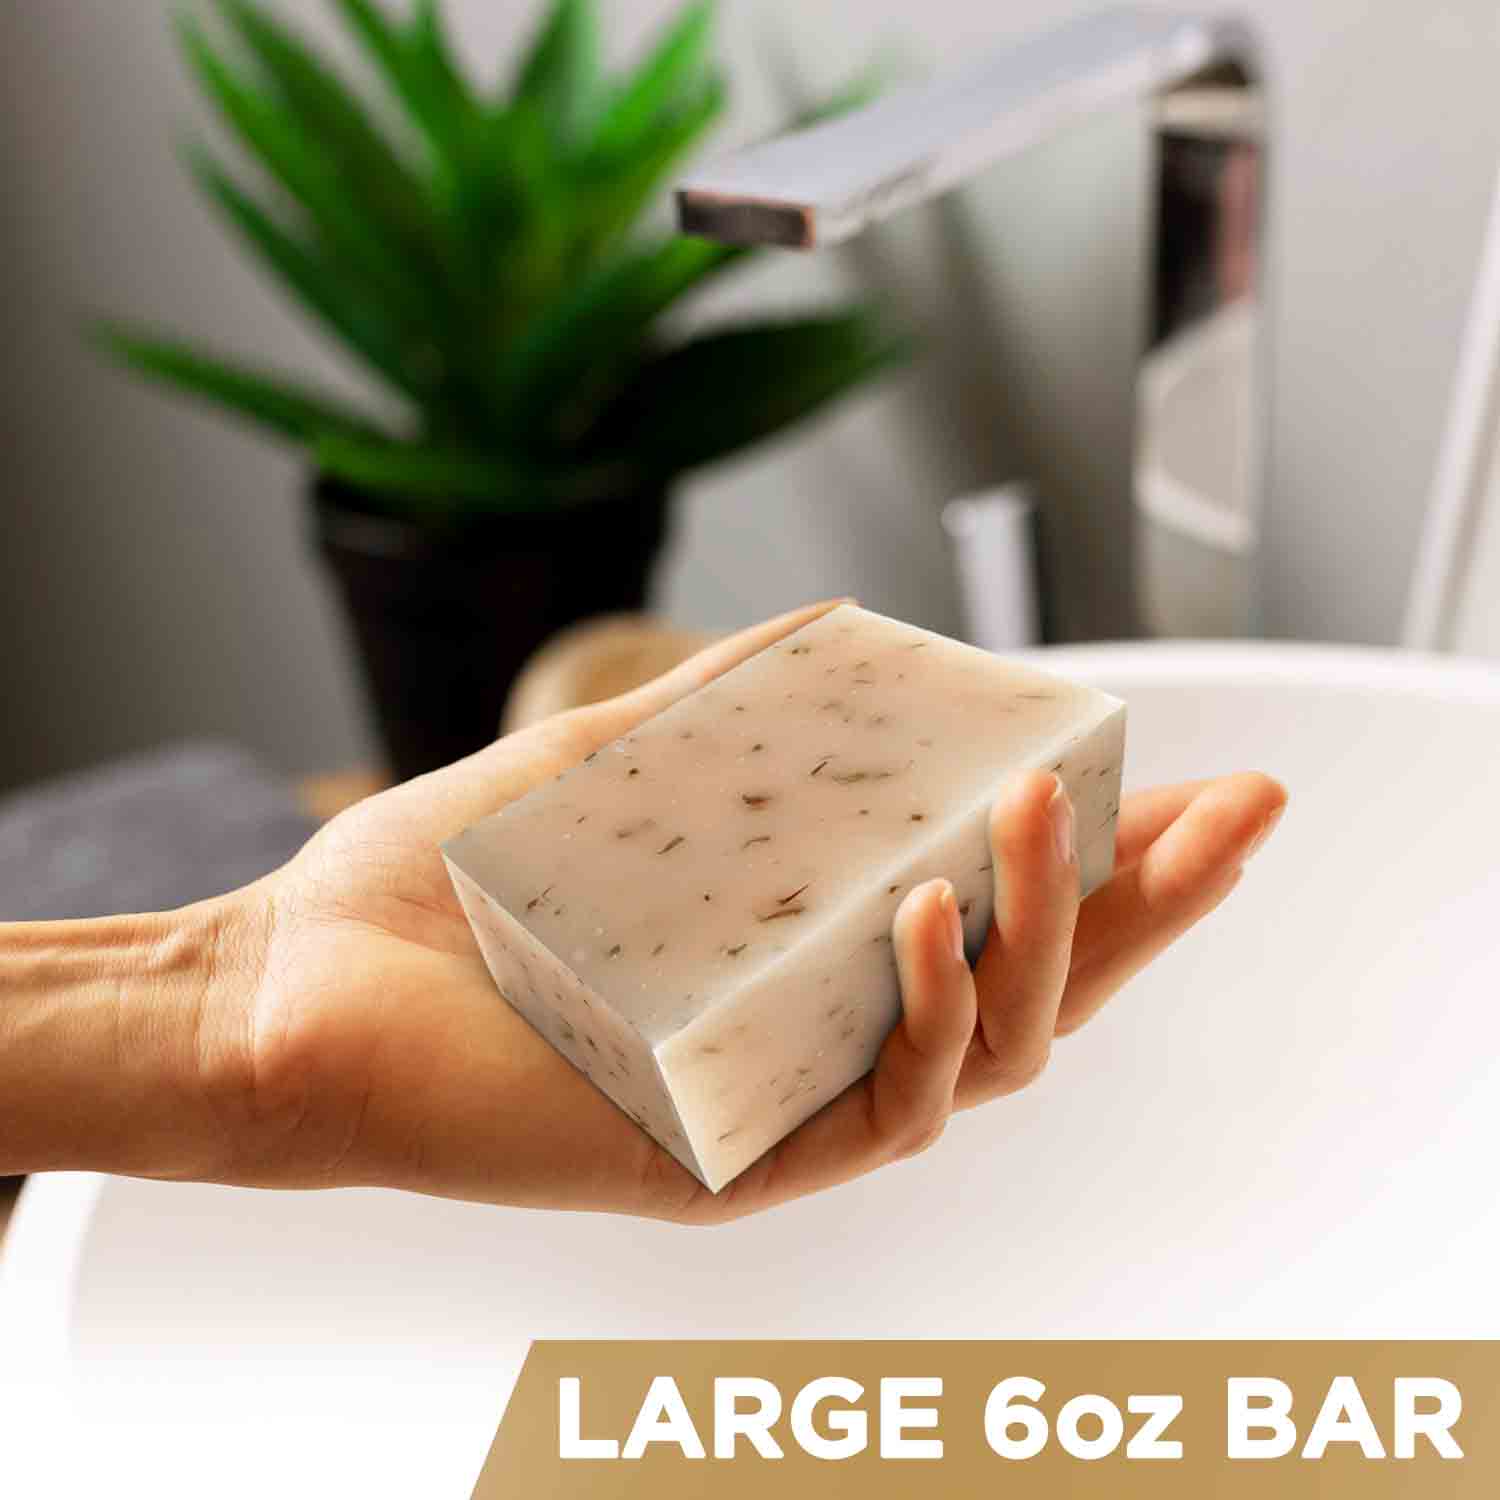 Introducing Our Luxurious Honey Oat & Shea Bar Soap – Now Available on Amazon!